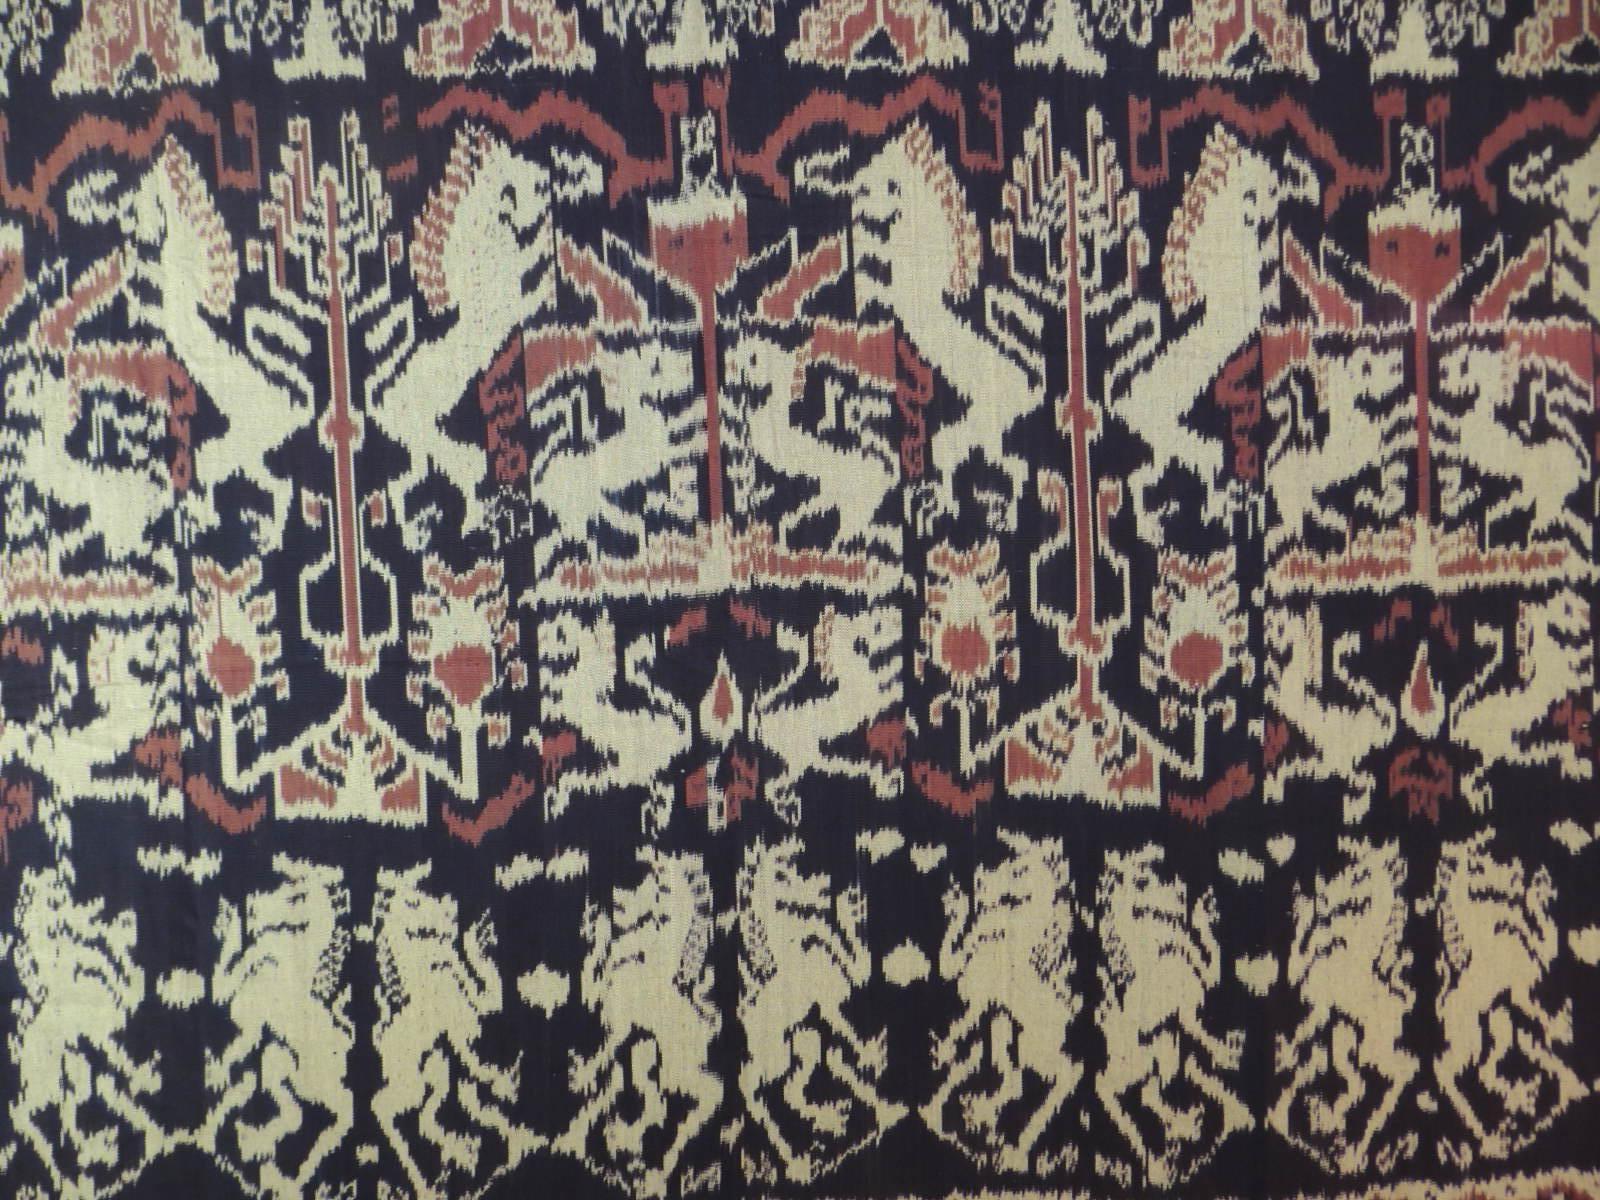 Large vintage woven ikat wall hanging/tapestry. Depicting large scale lions and flowers.
In shades of black, brown and natural with hand twisted fringes.
Ideal to use on a bed, window or table.
75